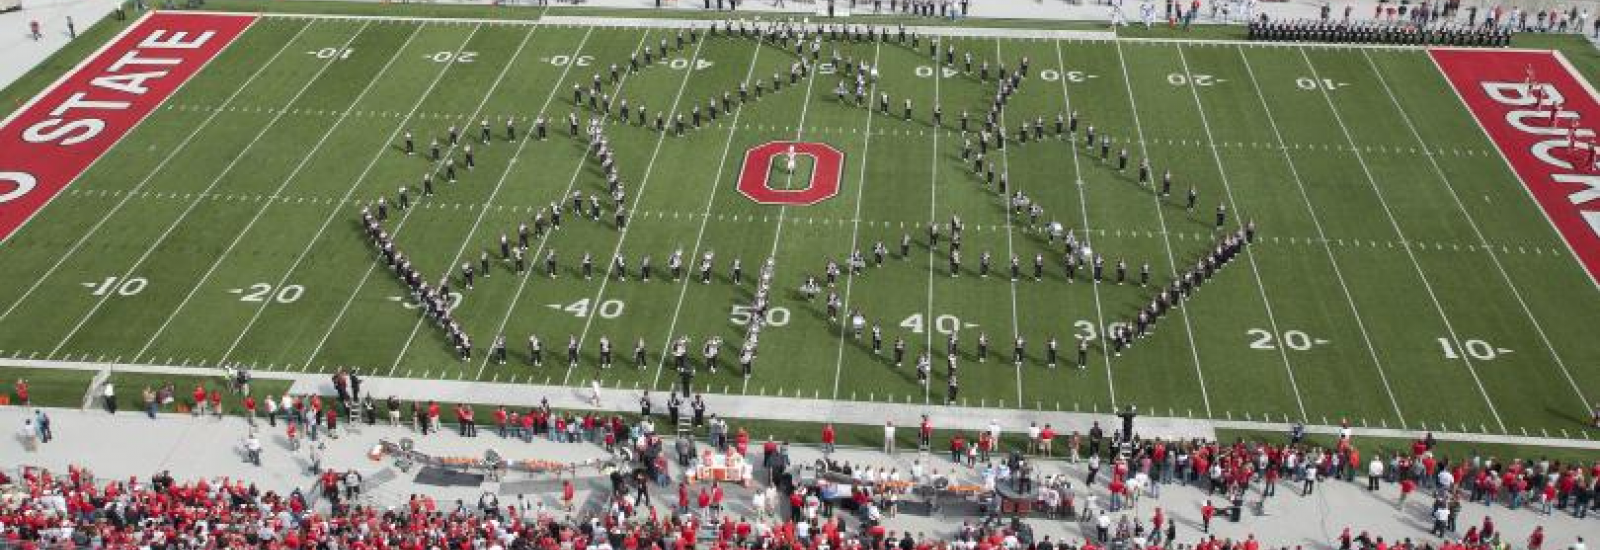 Ohio State band members forming the recycle symbol in the Ohio Stadium